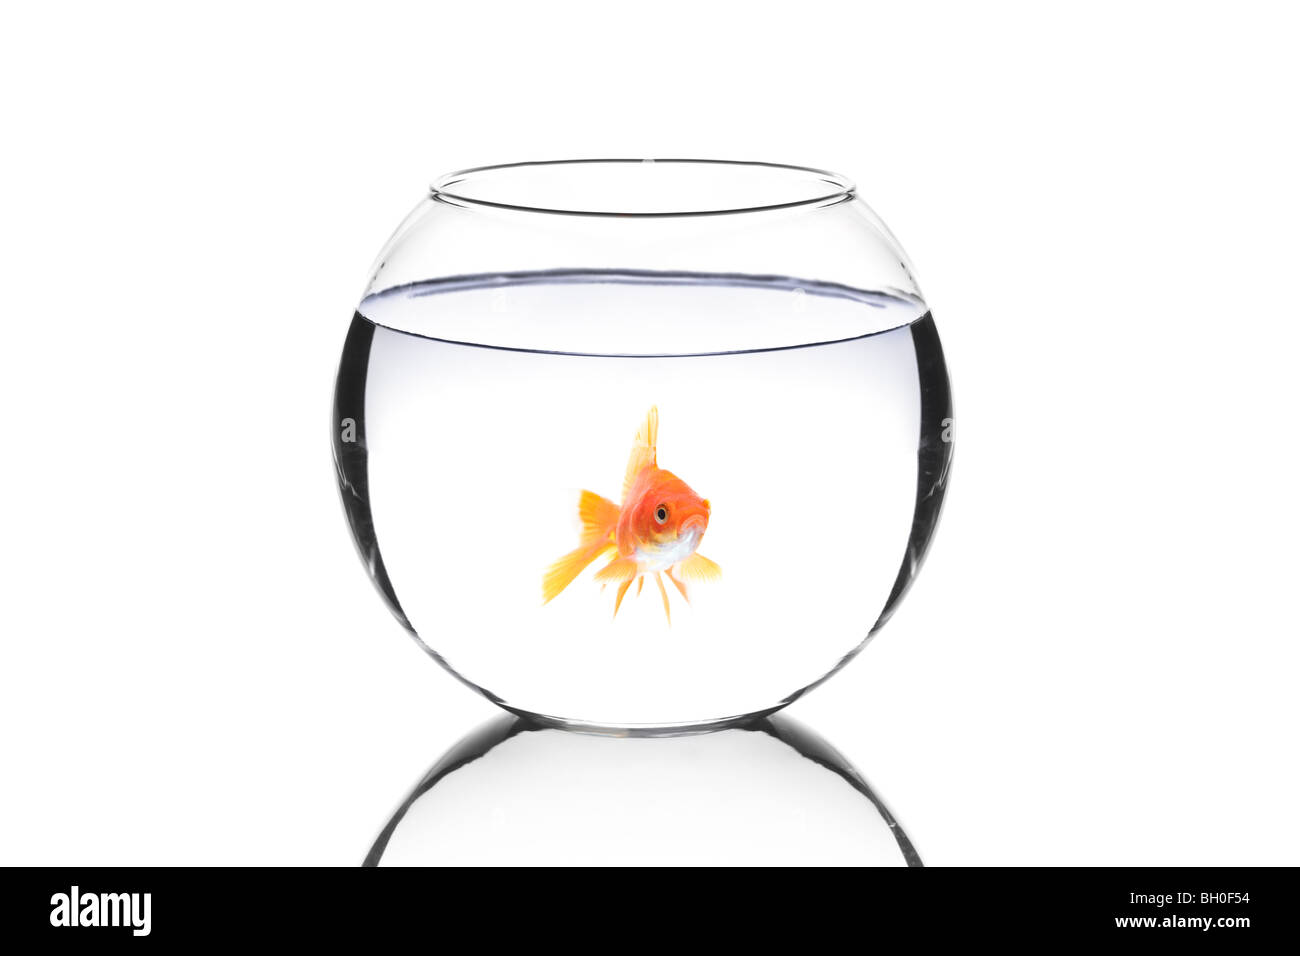 Golden fish in a fishbowl isolated on white background Stock Photo